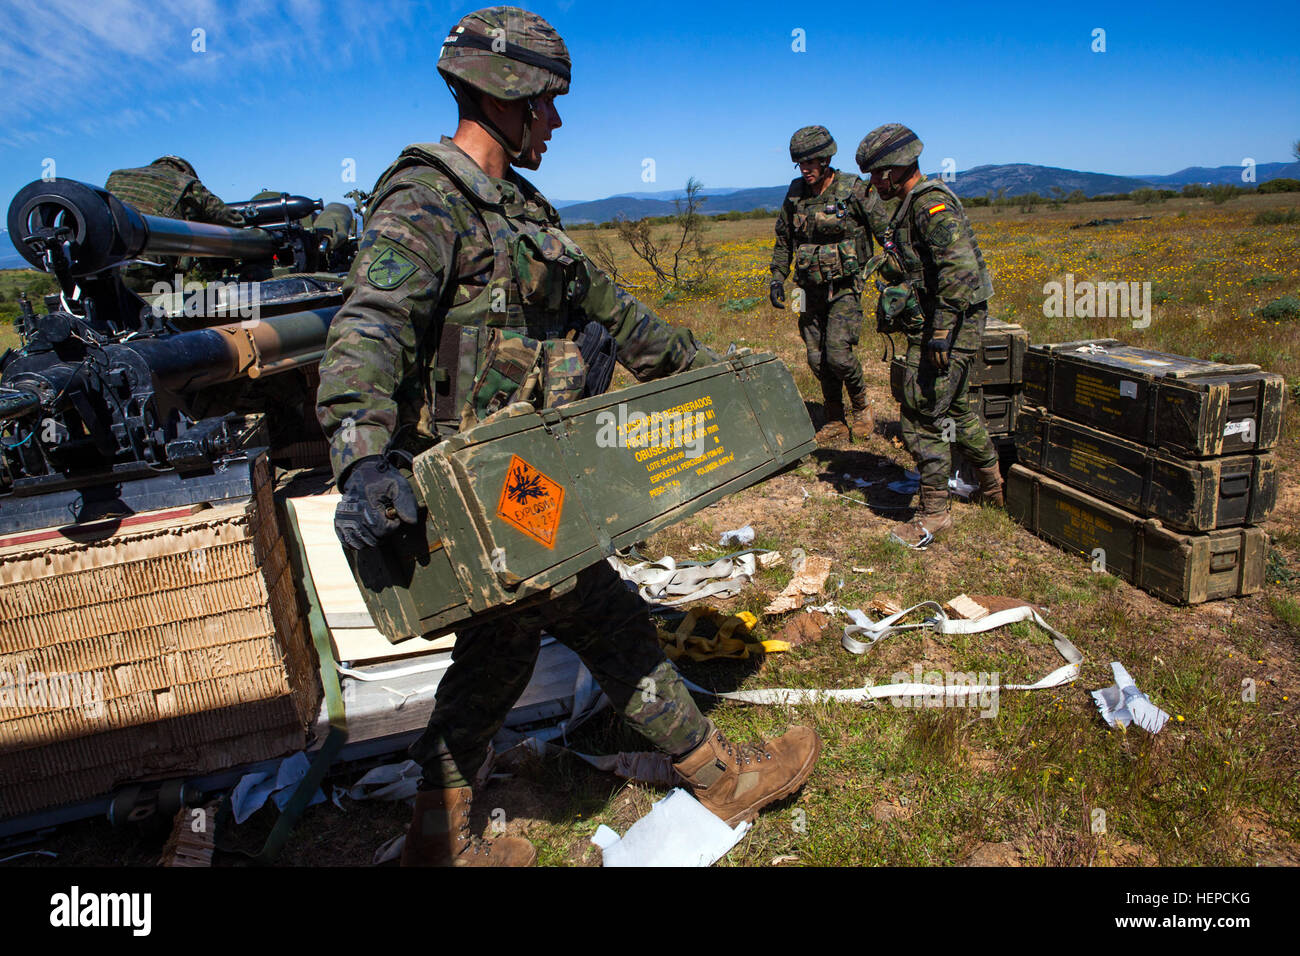 Spanish Soldiers from the Brigada Paracaidista recover ammunition following an airborne cargo drop during Operation Skyfall - España, Madrid, Spain, May 7, 2015. Operation Skyfall - España is an exercise initiated and organized by the 982nd Combat Camera Company, and hosted by the Brigada Paracaidista of the Spanish army. The exercise is a bilateral subject matter exchange focusing on interoperability of combat camera training and documentation of airborne operations.  (U.S. Army photo by Staff Sgt. Justin P. Morelli / Released) Operation Skyfall - Espa%%%%%%%%C3%%%%%%%%B1a 150507-A-PP104-184 Stock Photo